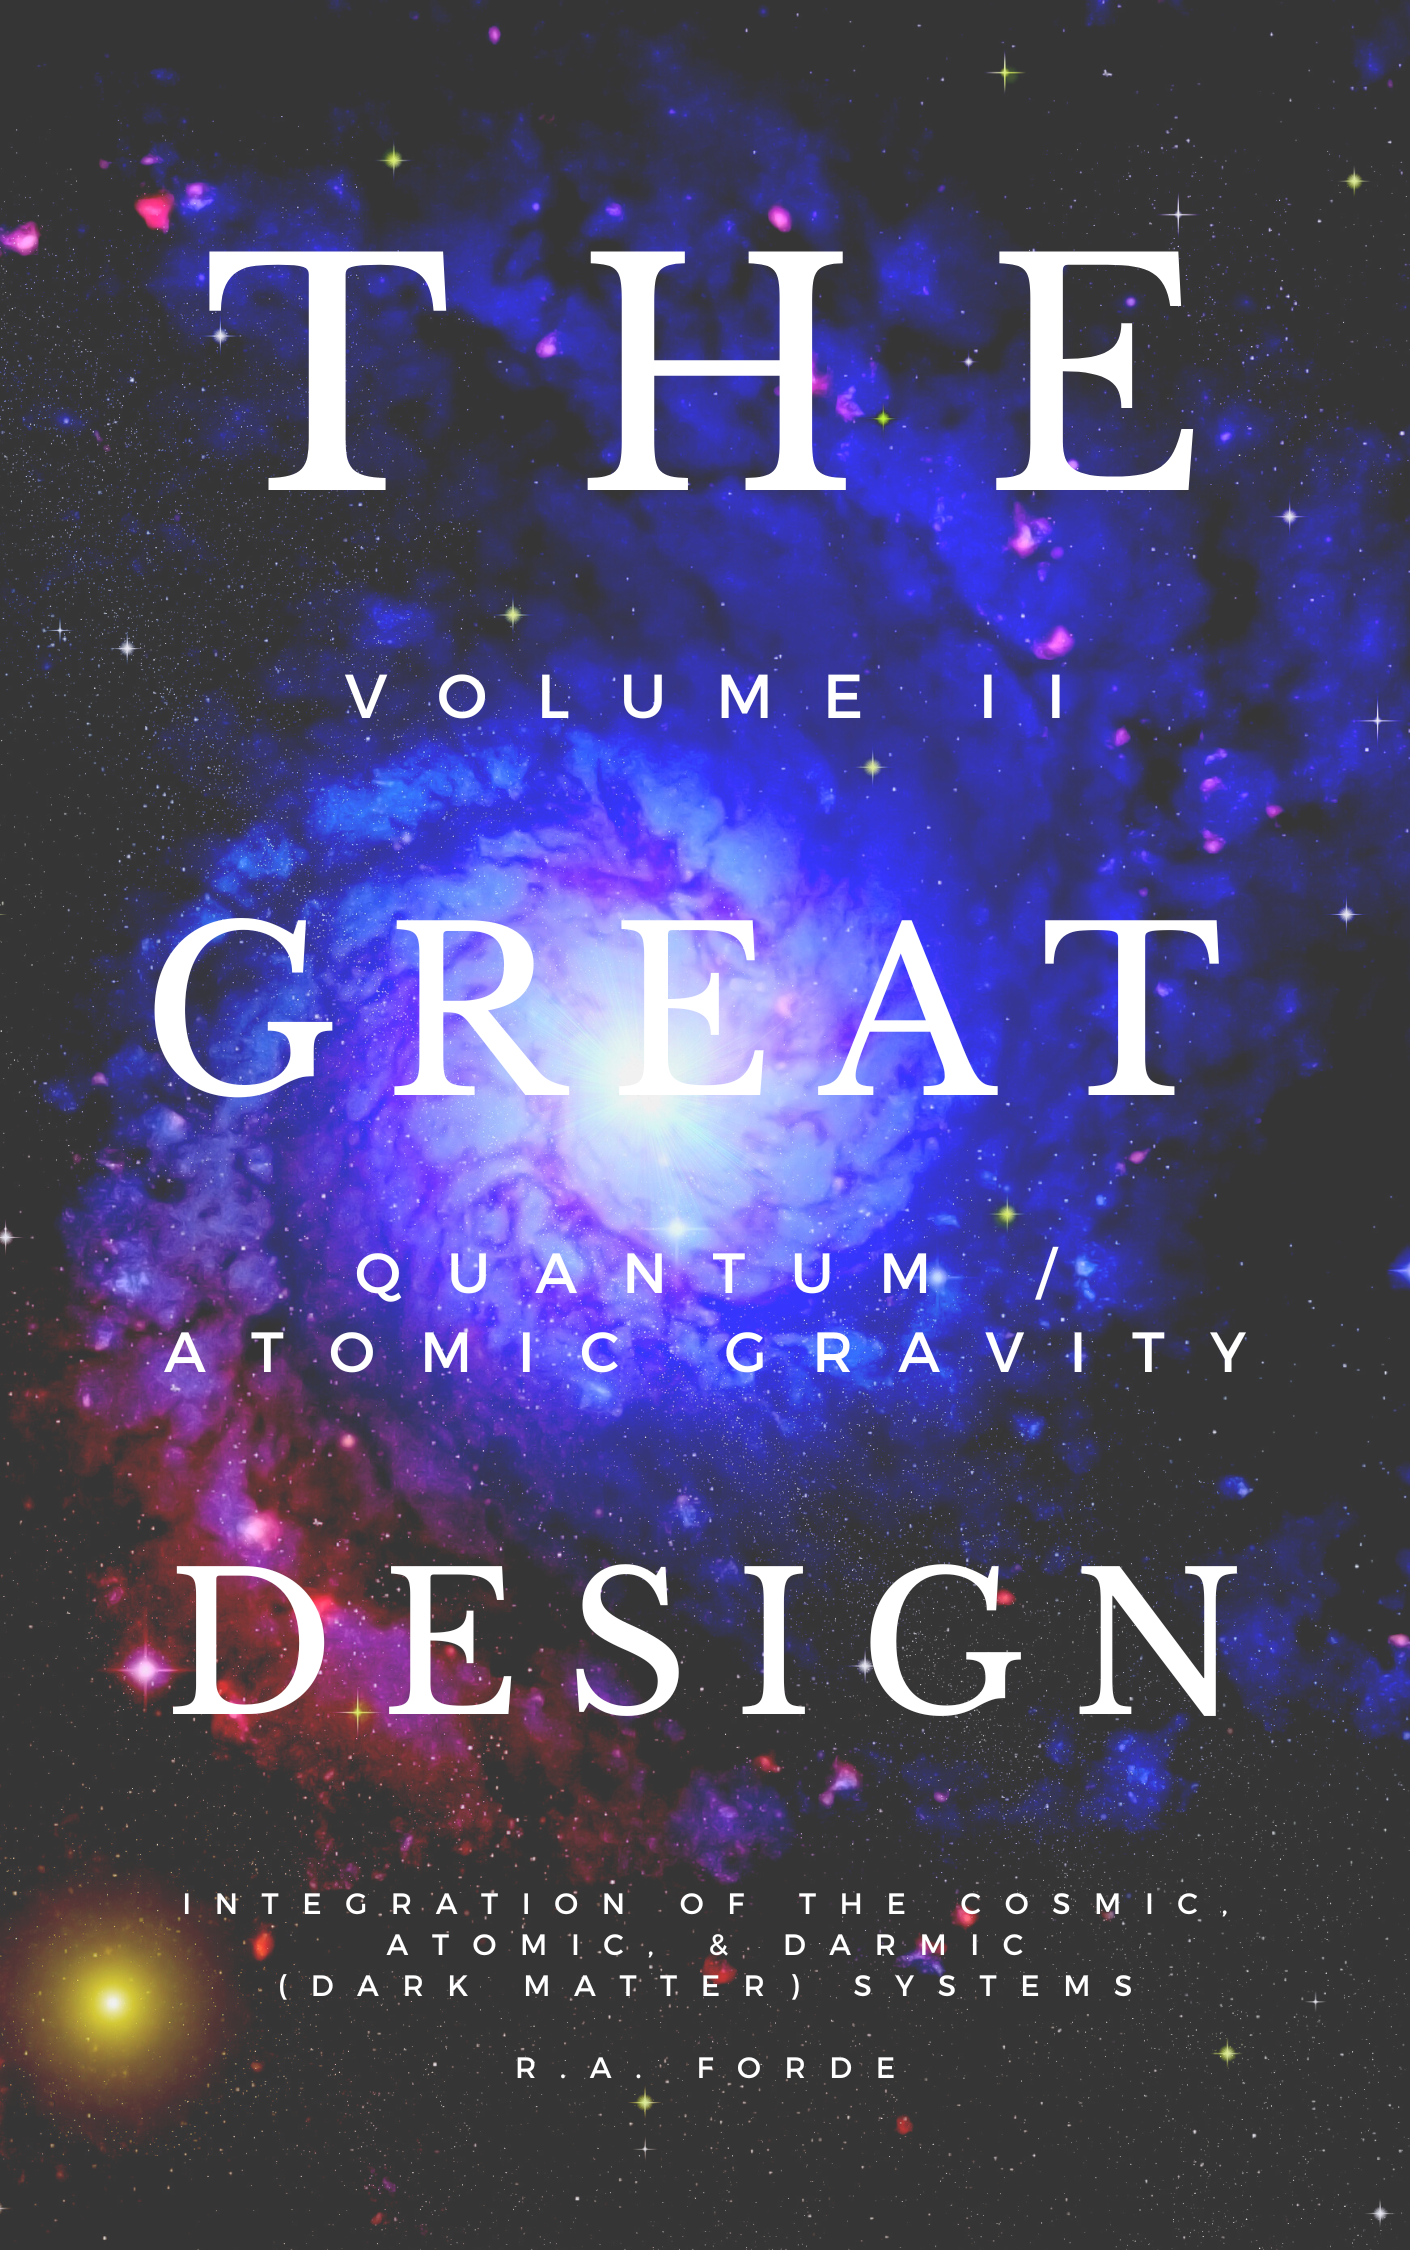 The Great Design Volume 2 book cover showing spiral galaxy